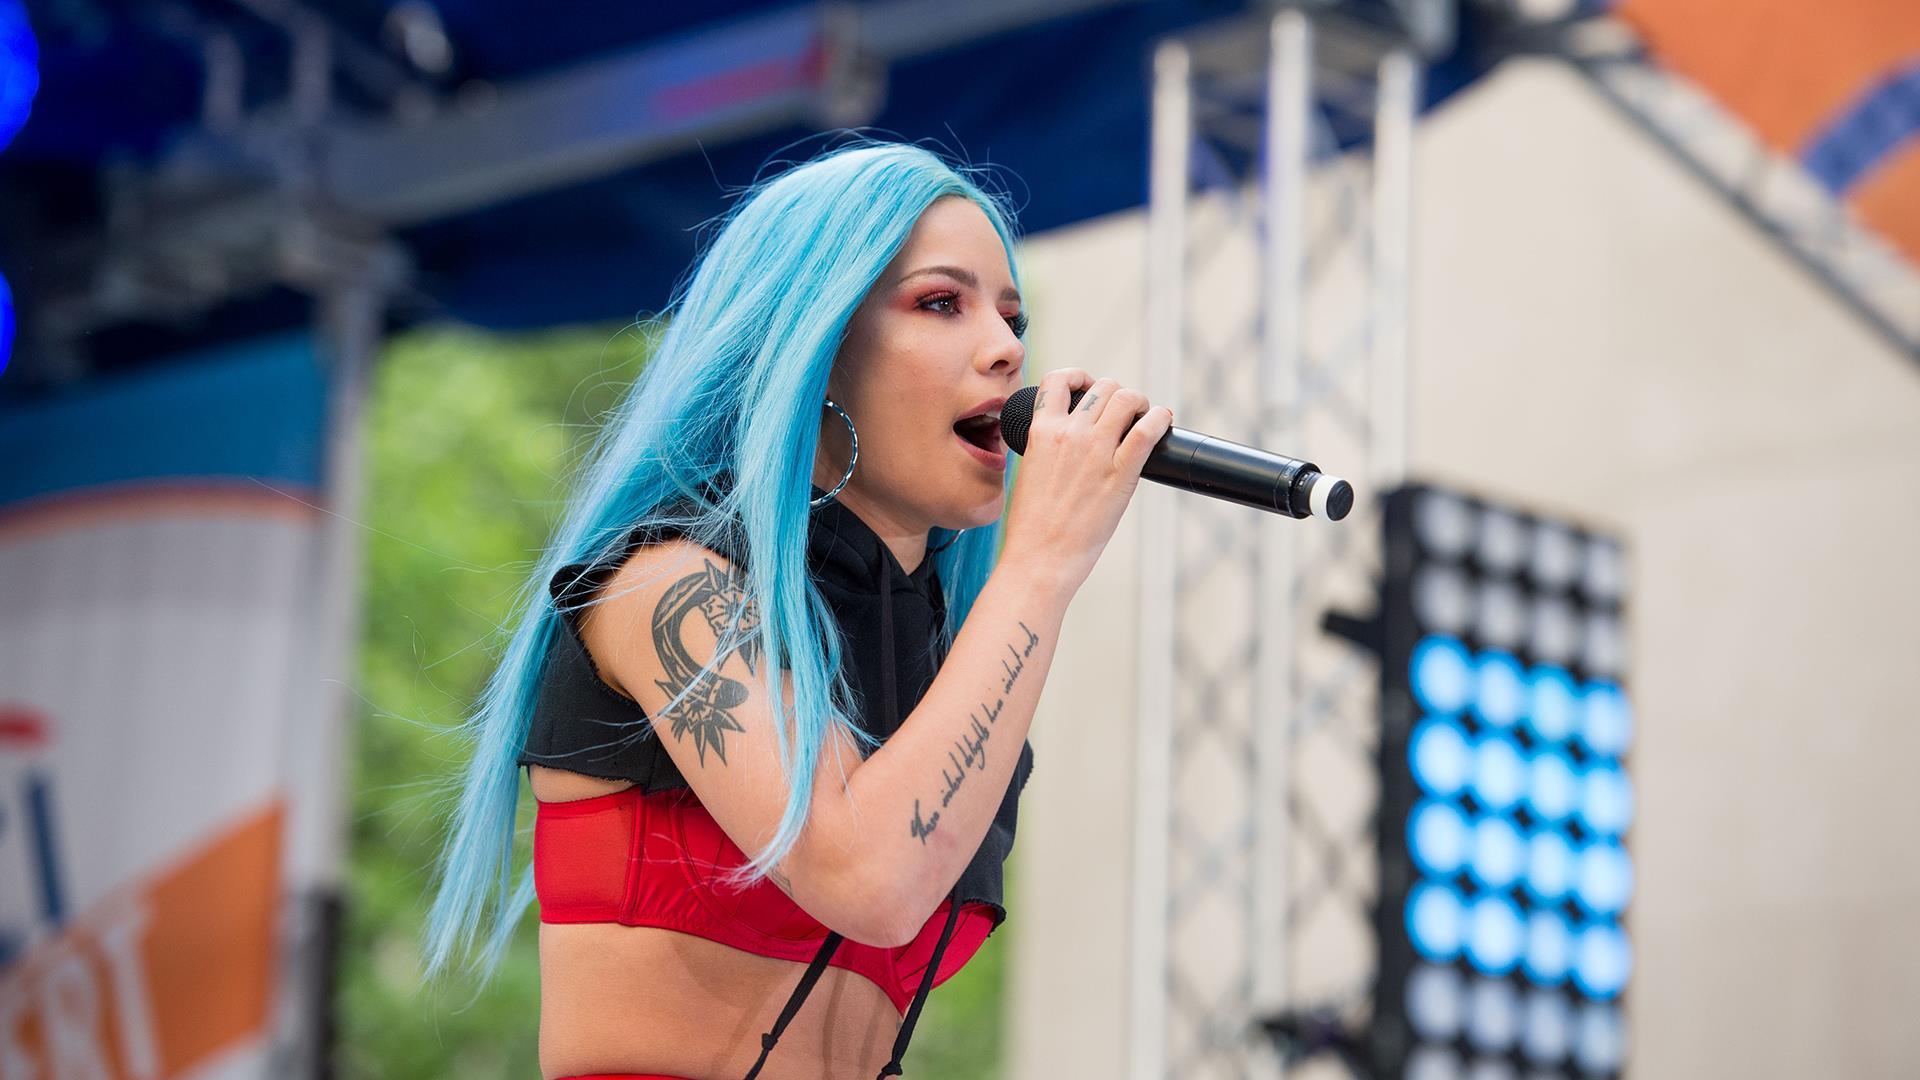 Halsey performs 'Colors' live on the Citi Concert stage on TODAY